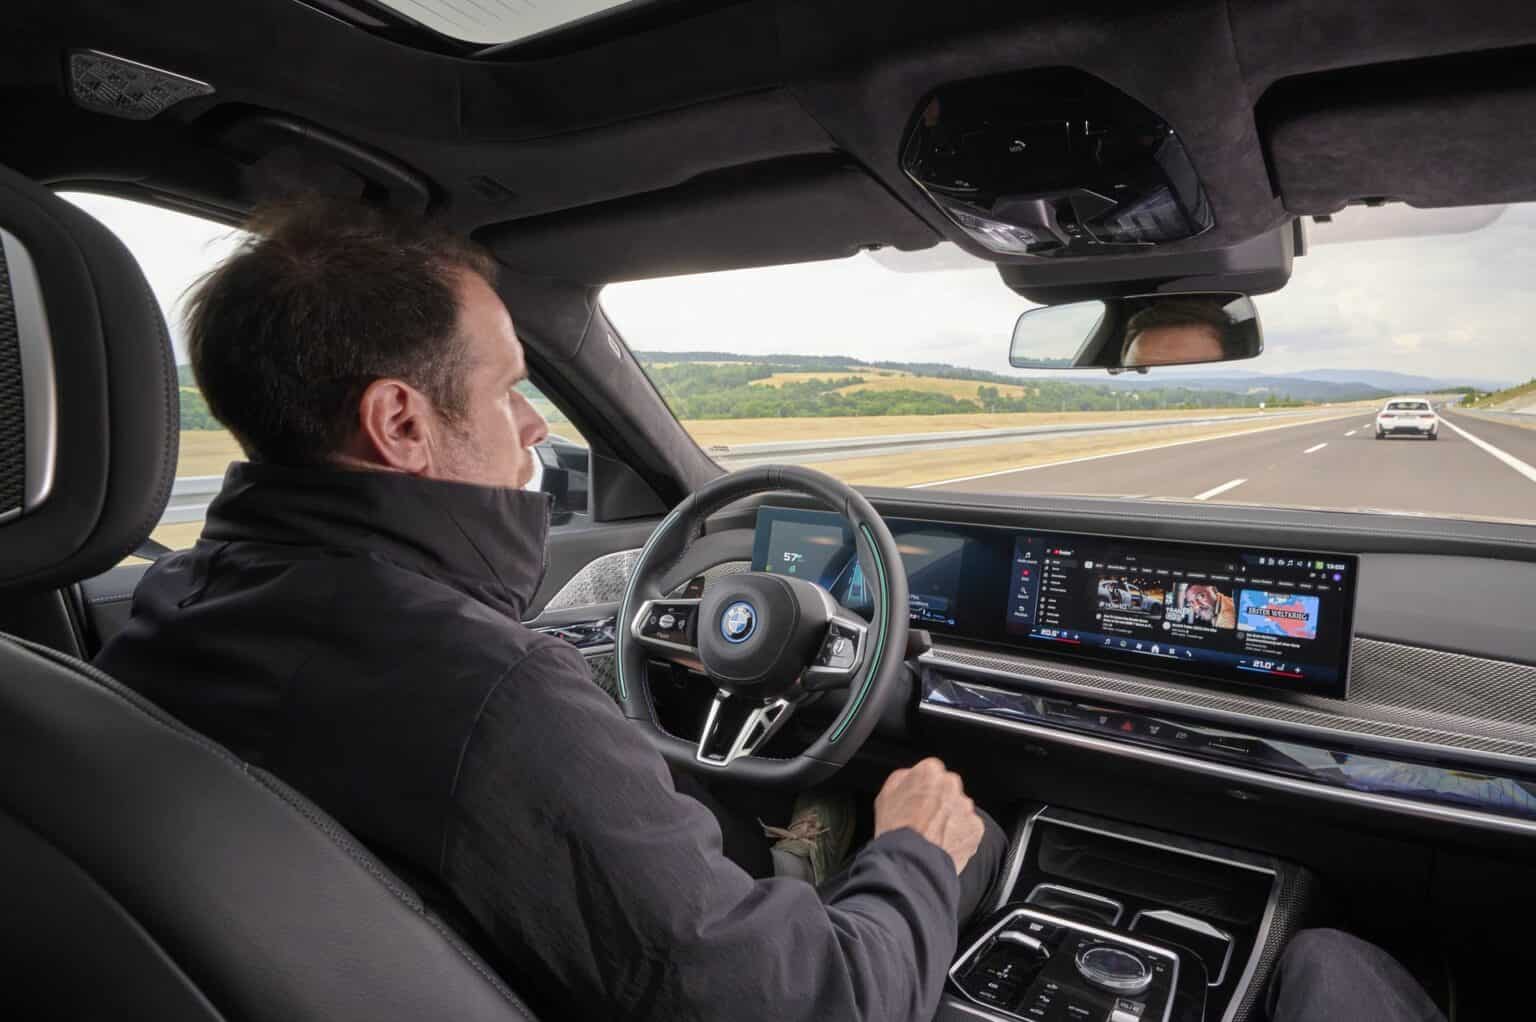 We Tested the First Ever Level 3 Self-Driving in a BMW